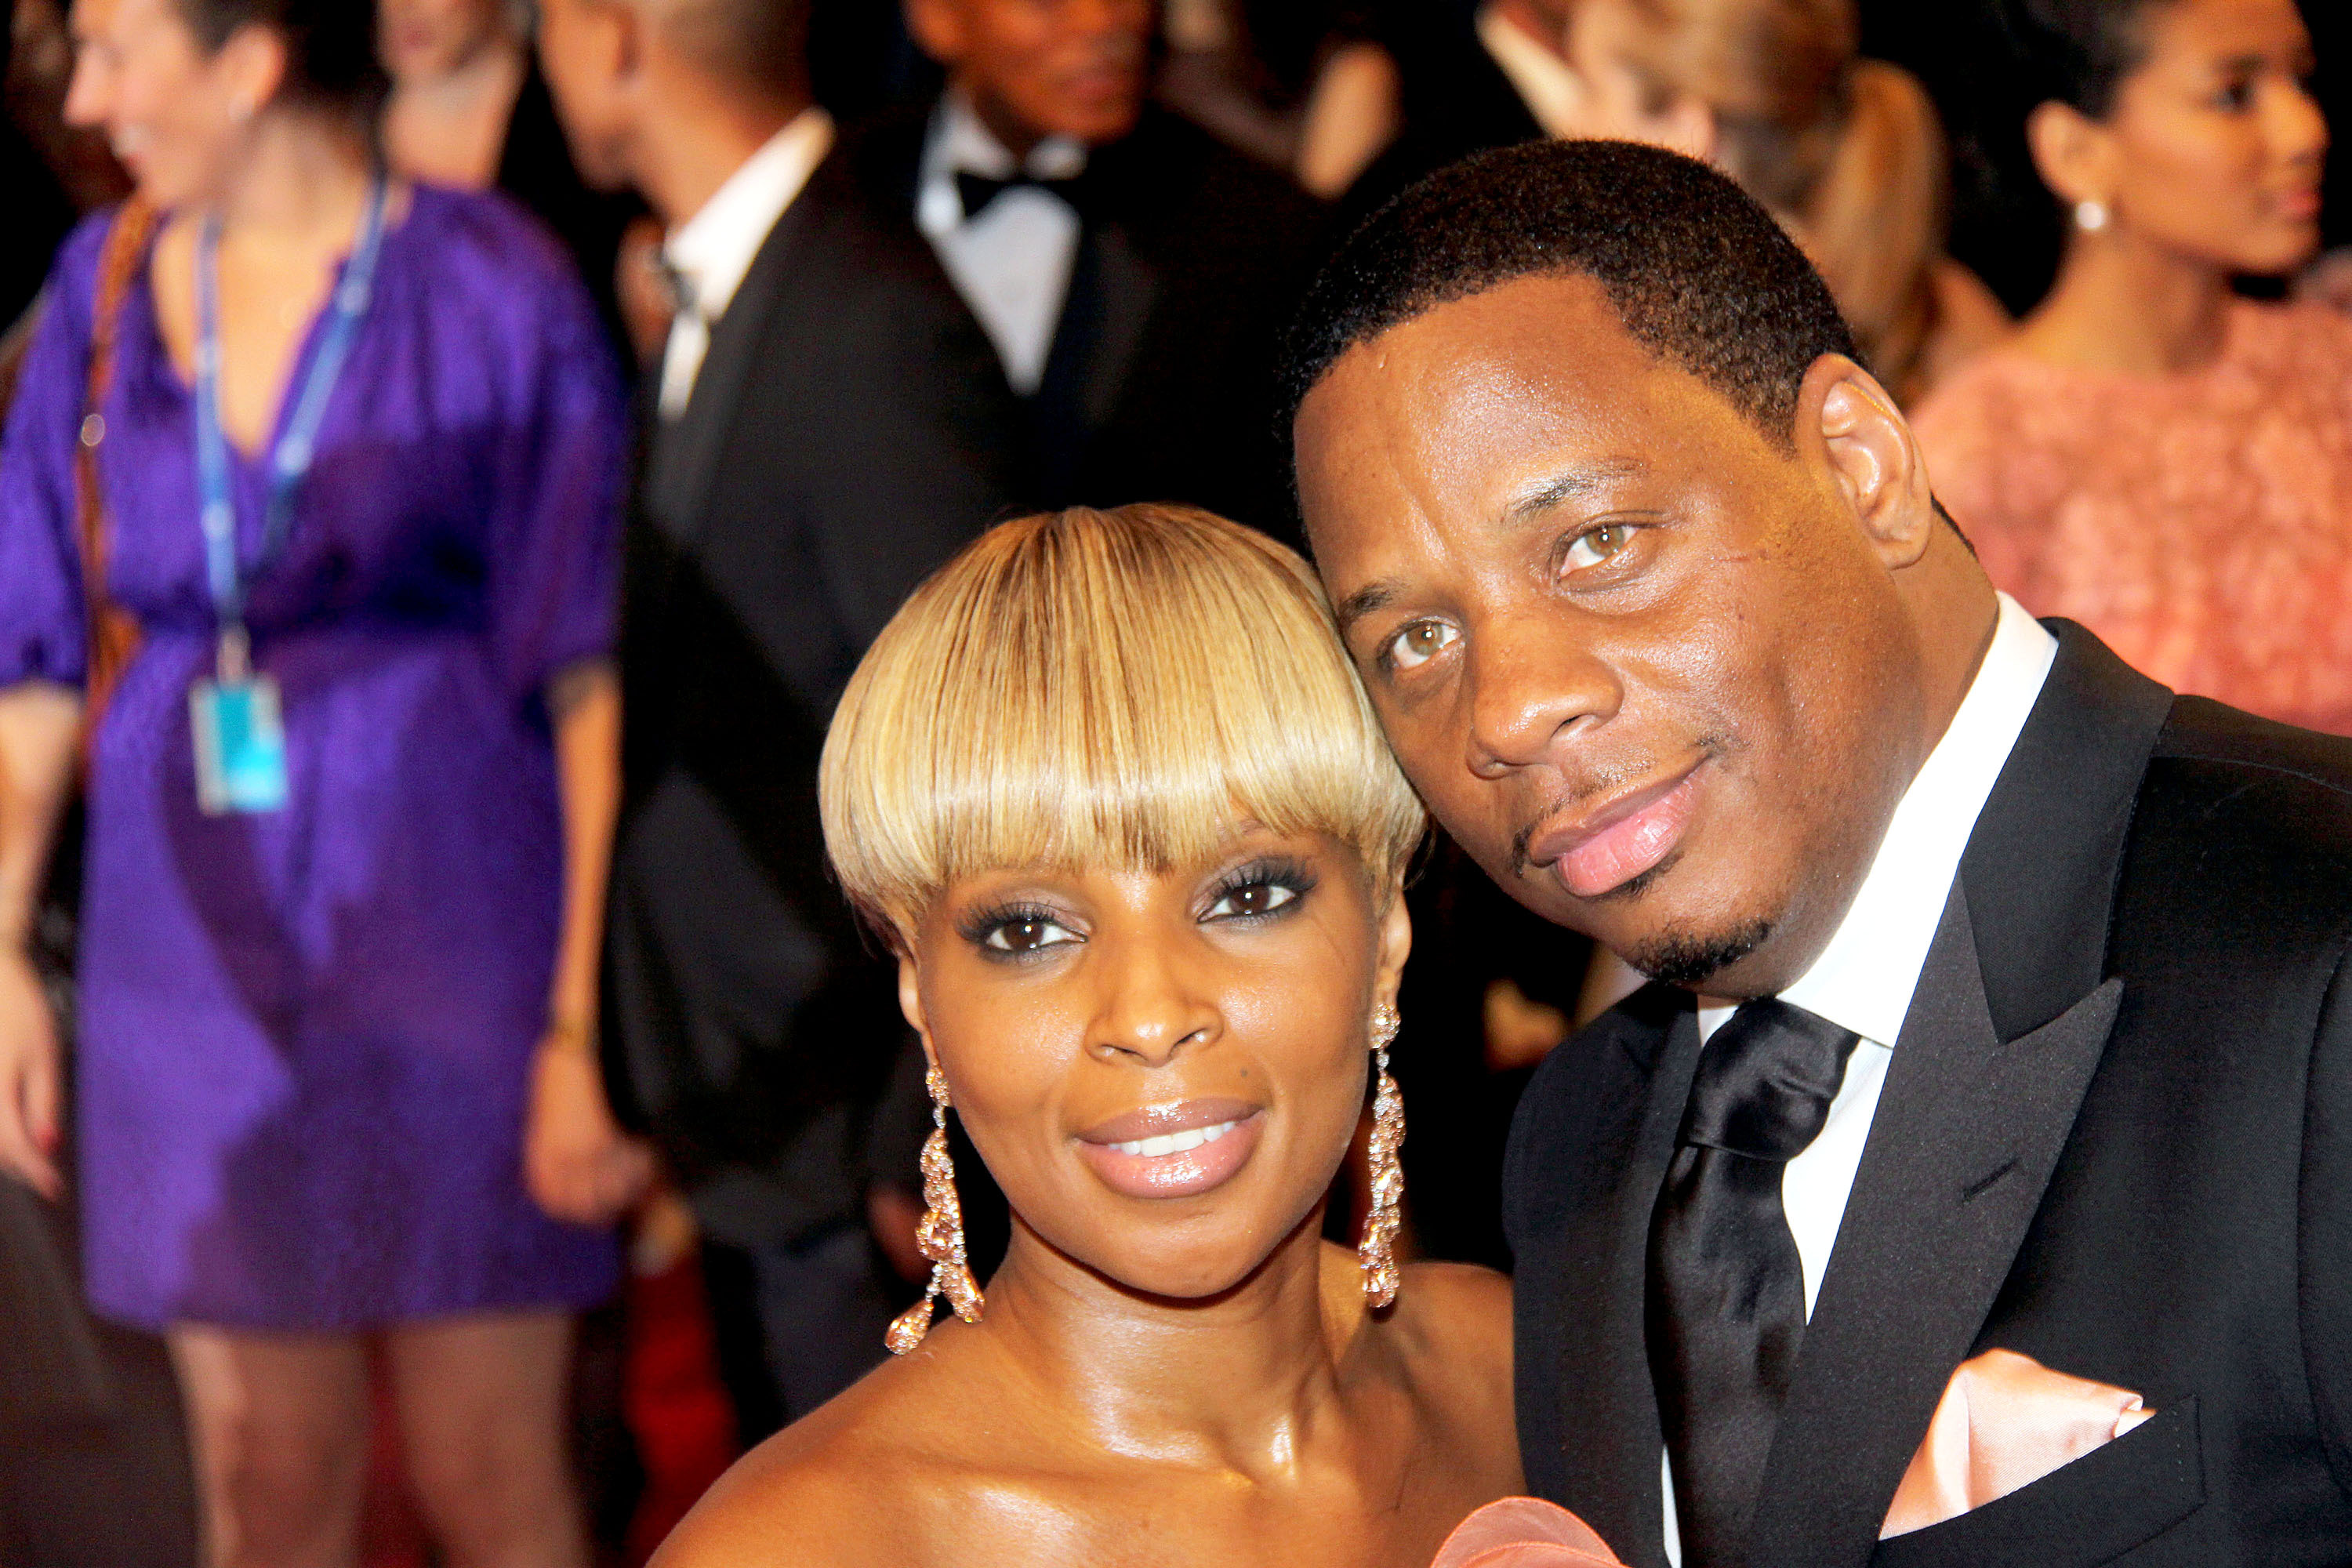 Mary J. Blige and Martin Kendu Isaacs The Costume Institute Gala Benefit to celebrate the opening of the 'American Woman: Fashioning a National Identity' exhibition held at The Metropolitan Museum of Art. Featuring: Mary J. Blige and Martin Kendu Isaacs Where: New York City, United States When: 03 May 2010 Credit: WENN